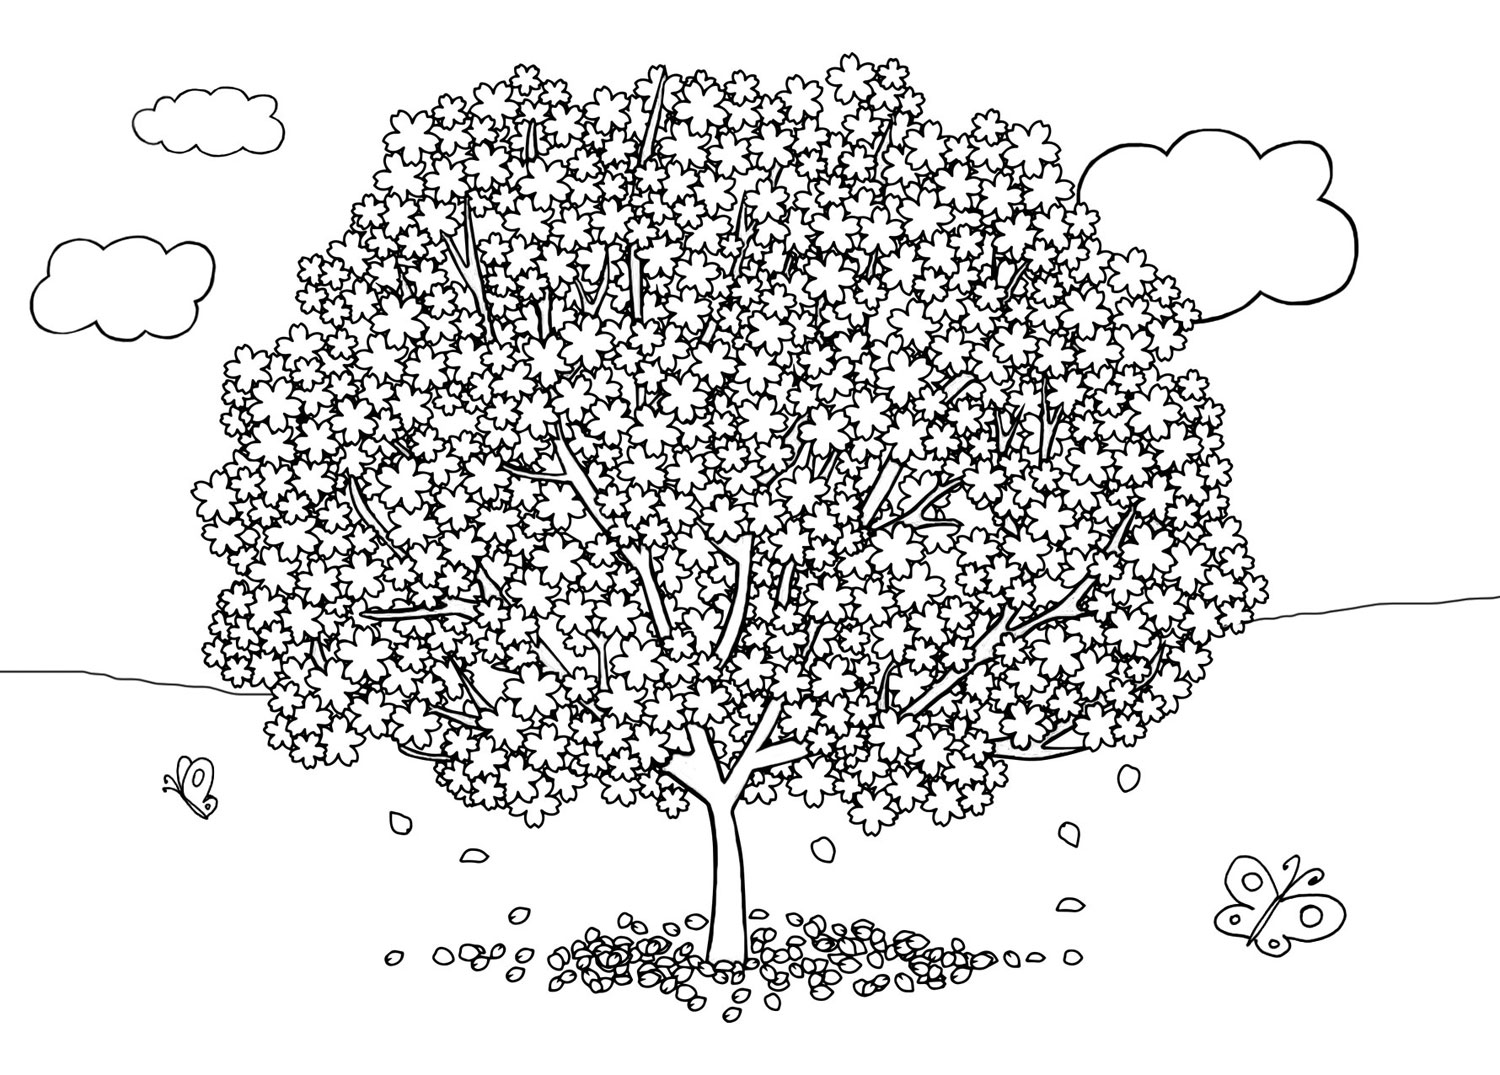 Printable colouring picture of a blossom filled tree and some butterflies